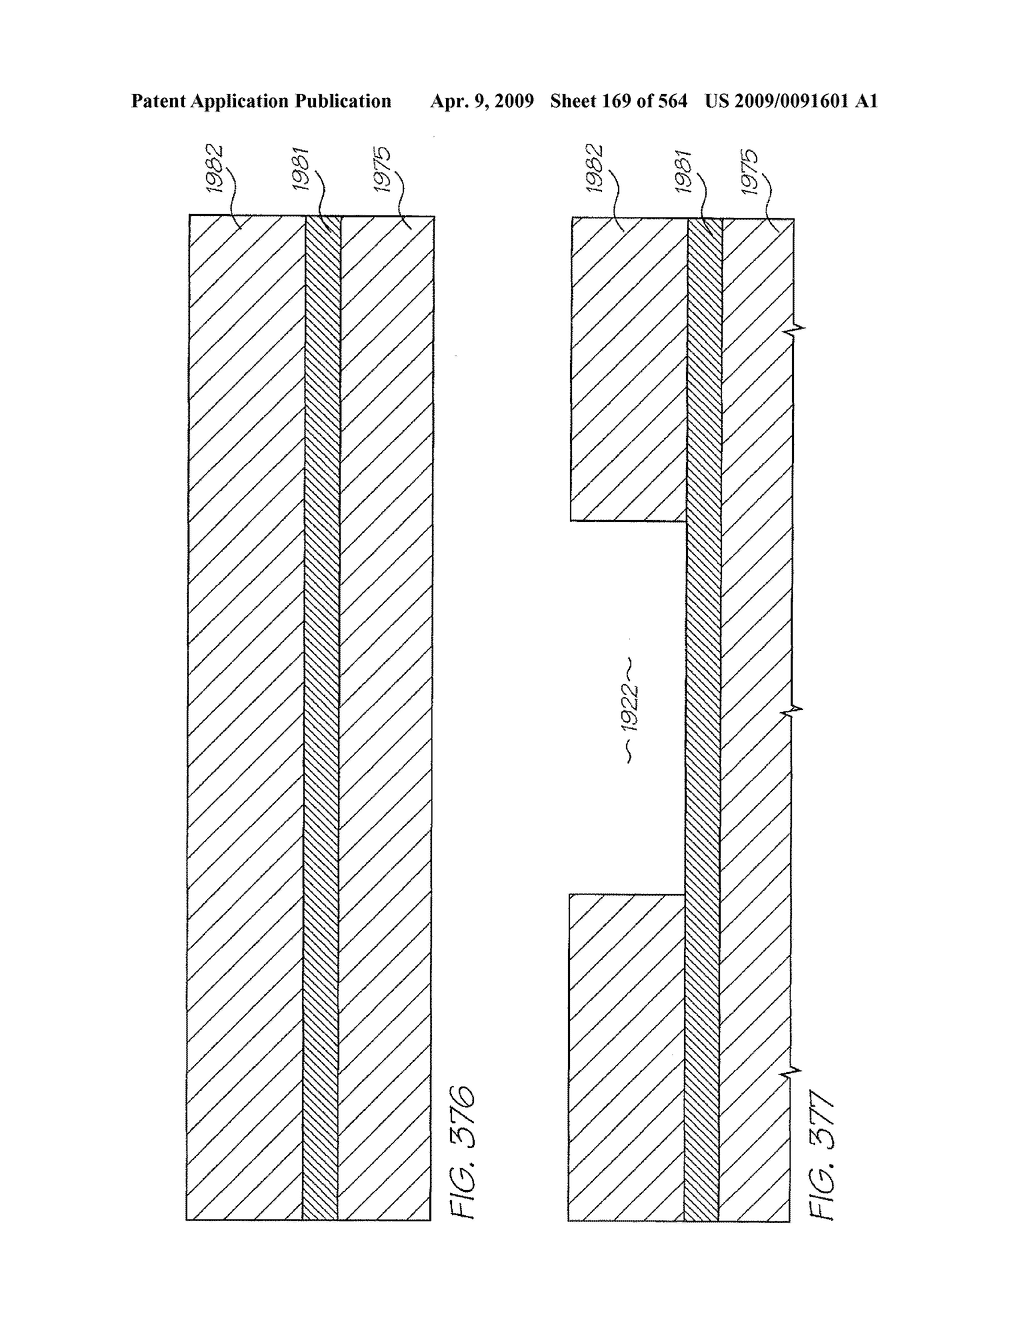 Inkjet Nozzle Utilizing Electrostatic Attraction Between Parallel Plates - diagram, schematic, and image 170